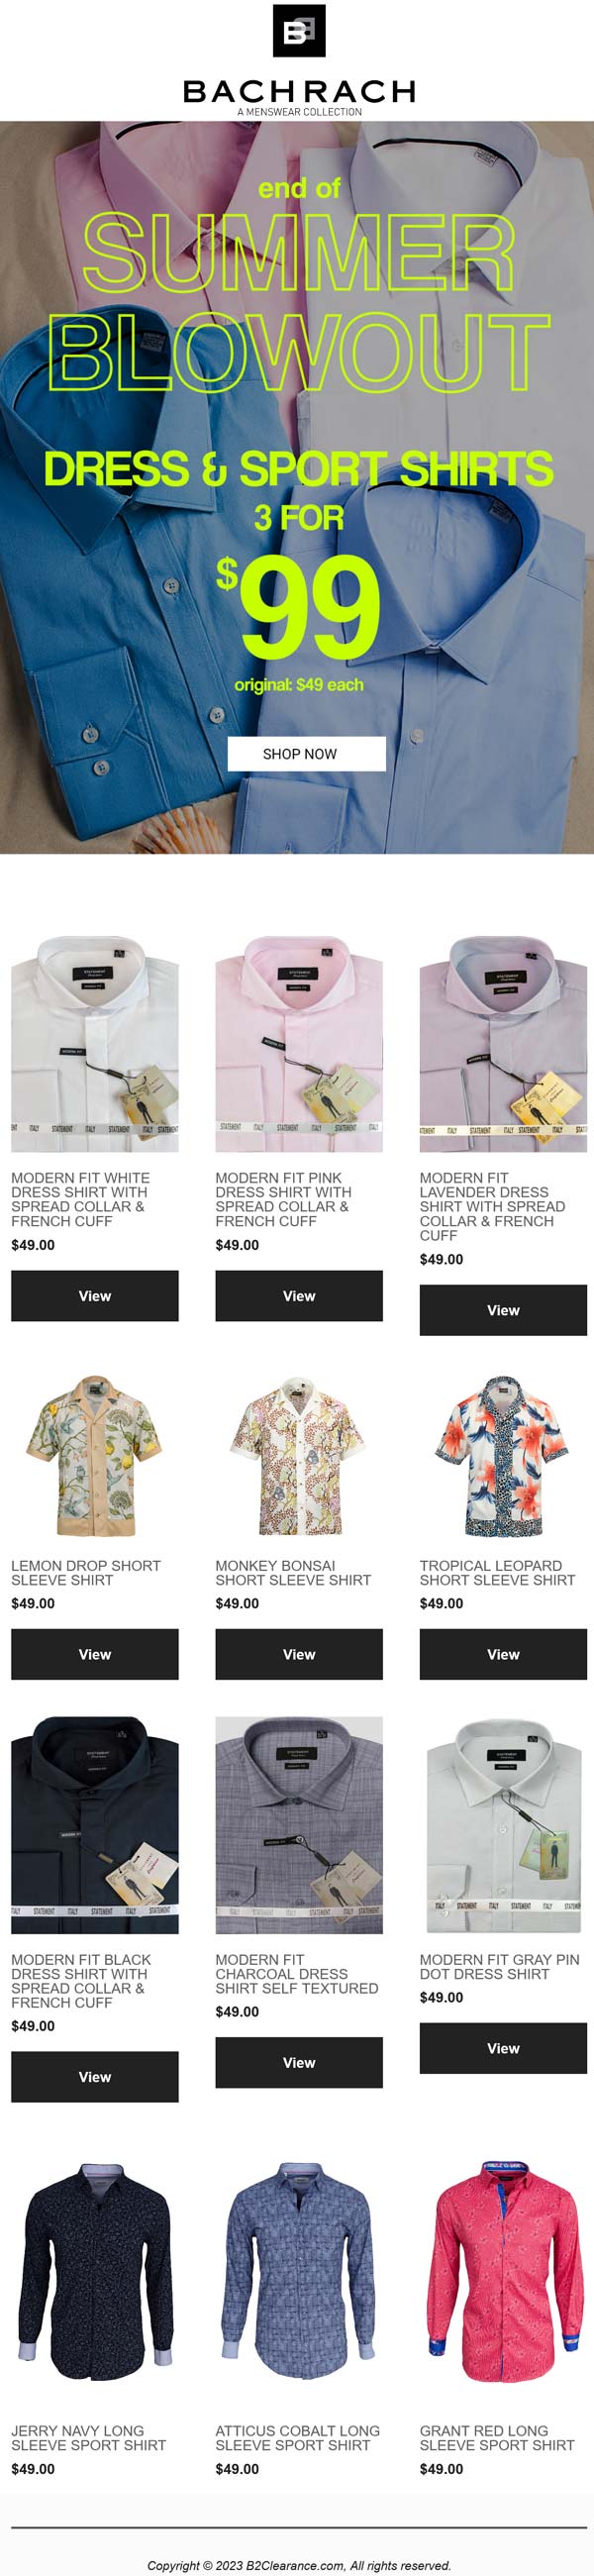 Bachrach stores Coupon  Dress & sport shirts are 3 for $99 at Bachrach #bachrach 